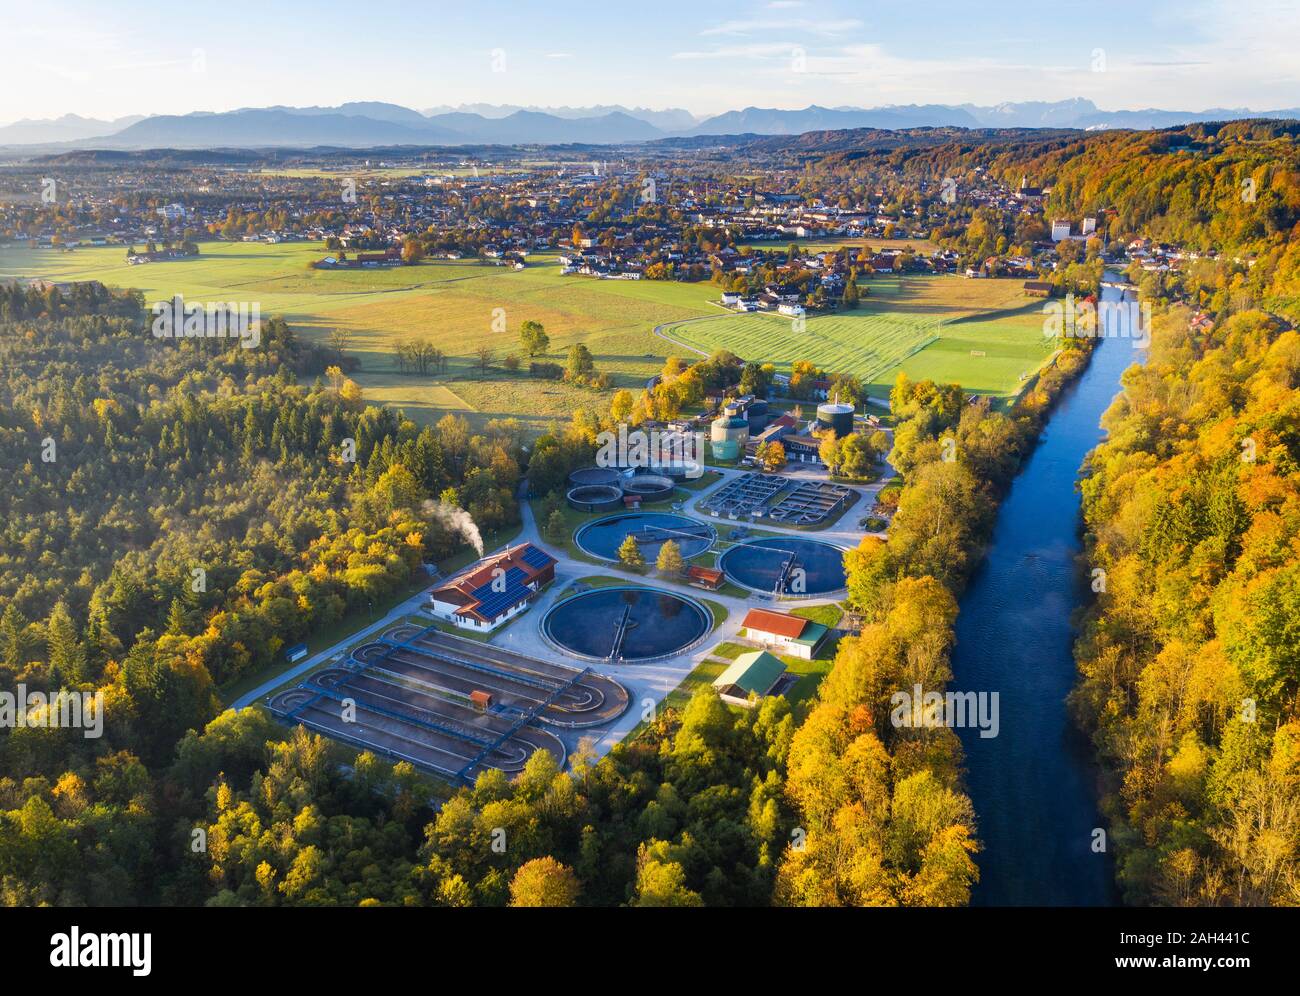 Germany, Bavaria, Upper Bavaria, Aerial view of sewage treatment plant on Loisach river Stock Photo